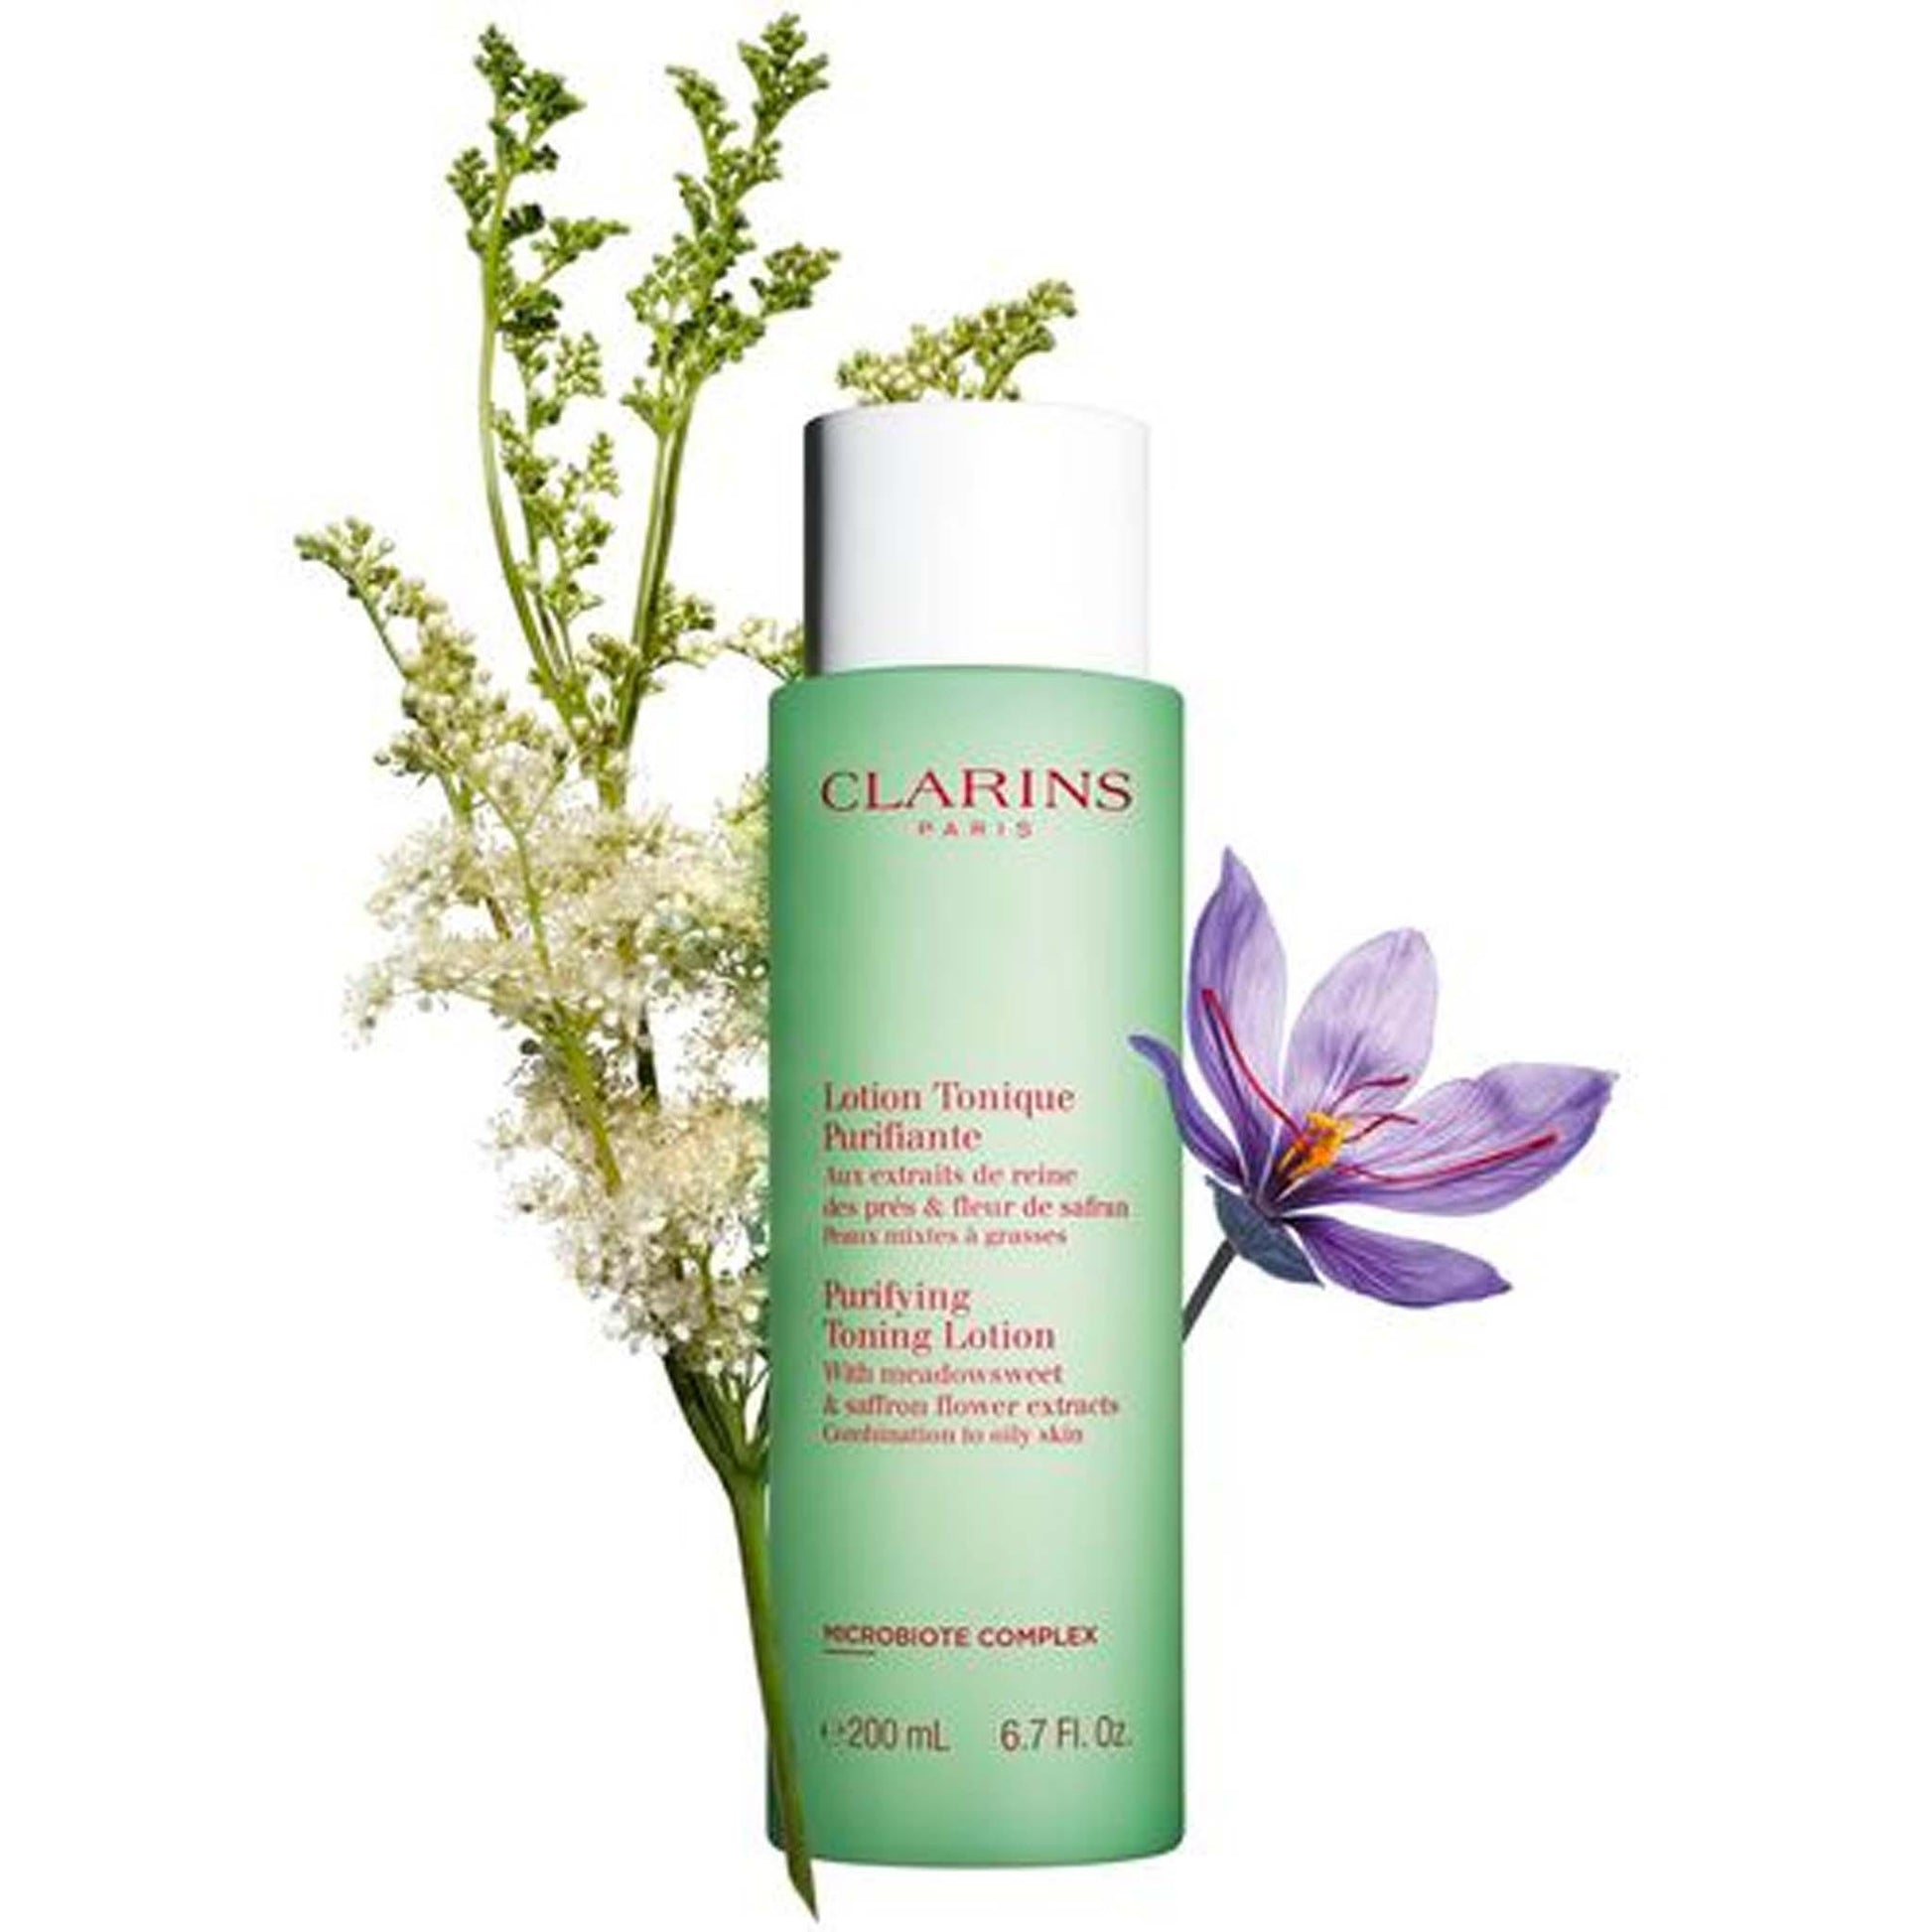 Toning Lotion With Iris For Combination Or Oily Skin - Cosmos Boutique New Jersey